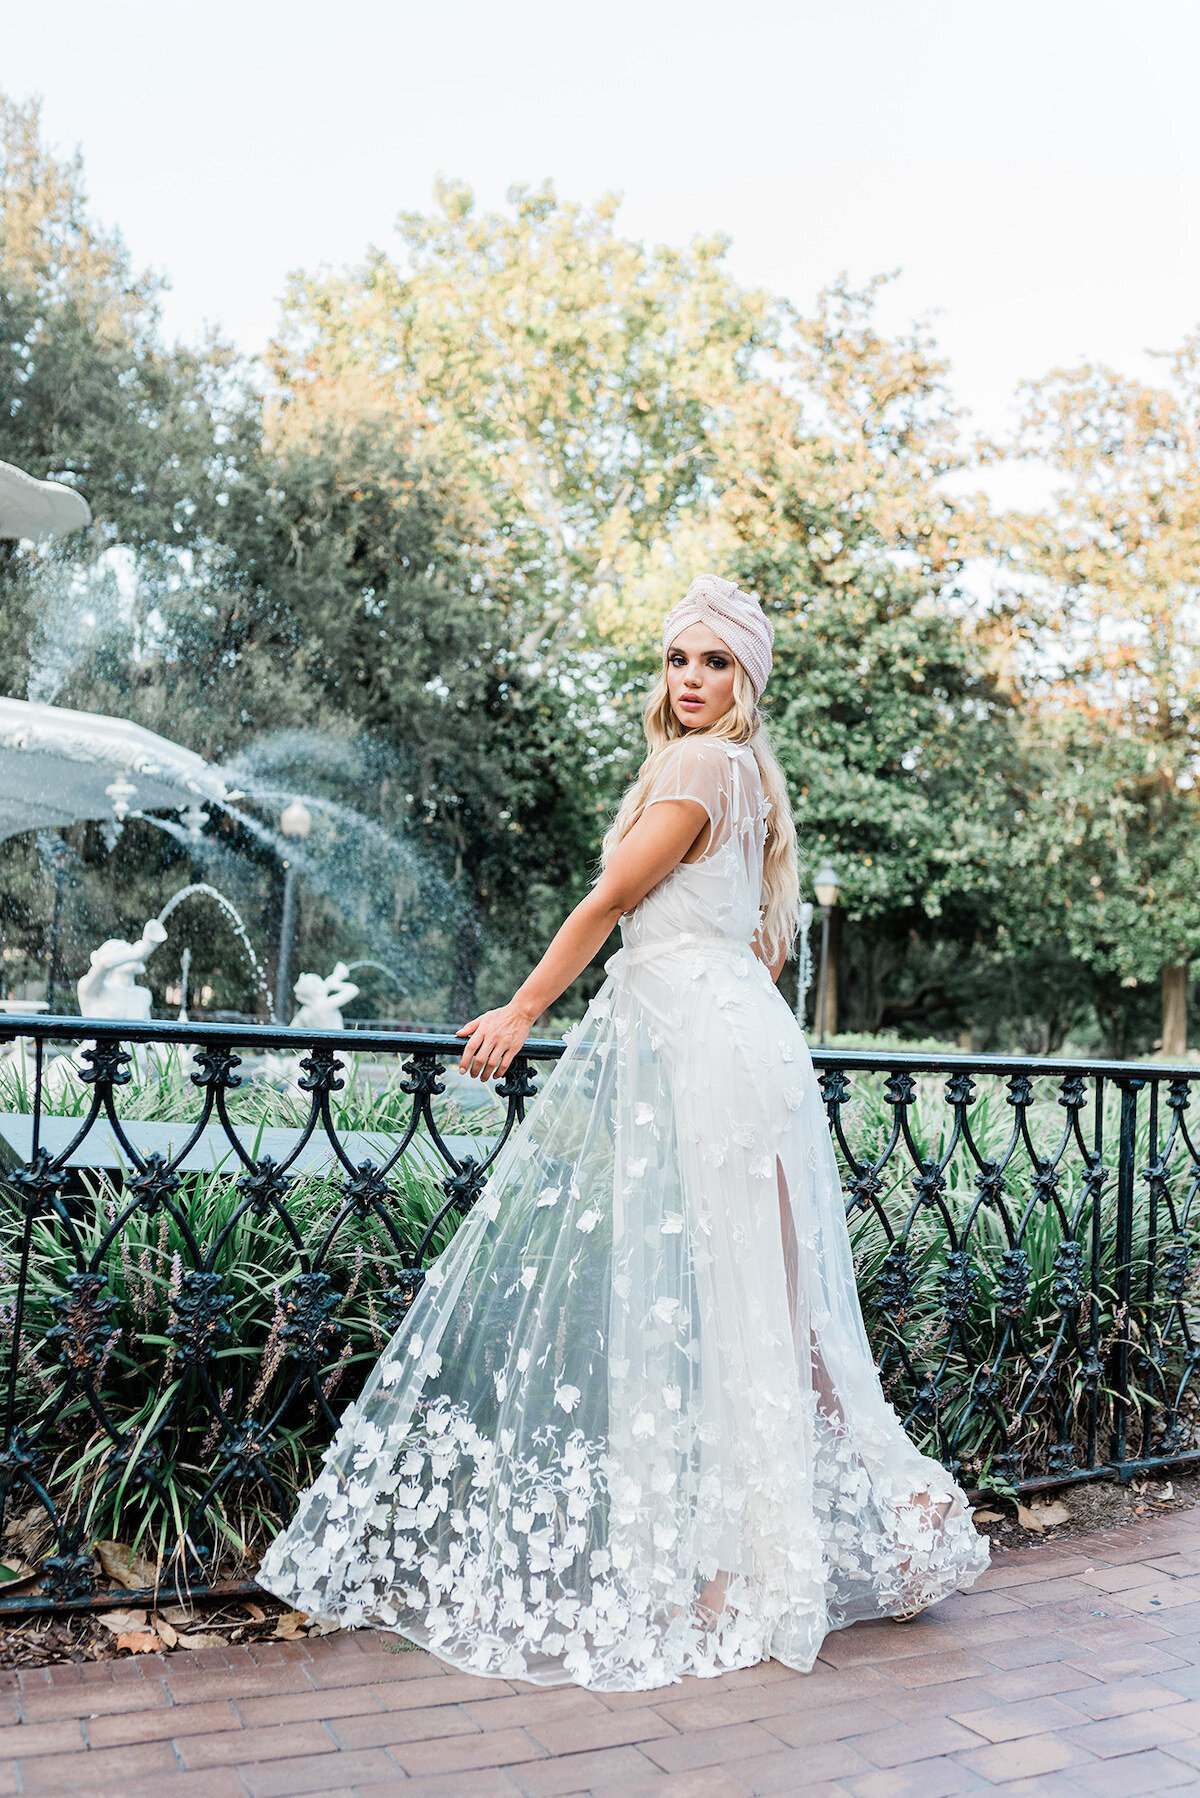 Crafting couture moments with finesse, our high-end bridal fashion photography captures the essence of each ensemble. Every image is a testament to the artistry and creativity behind couture design.